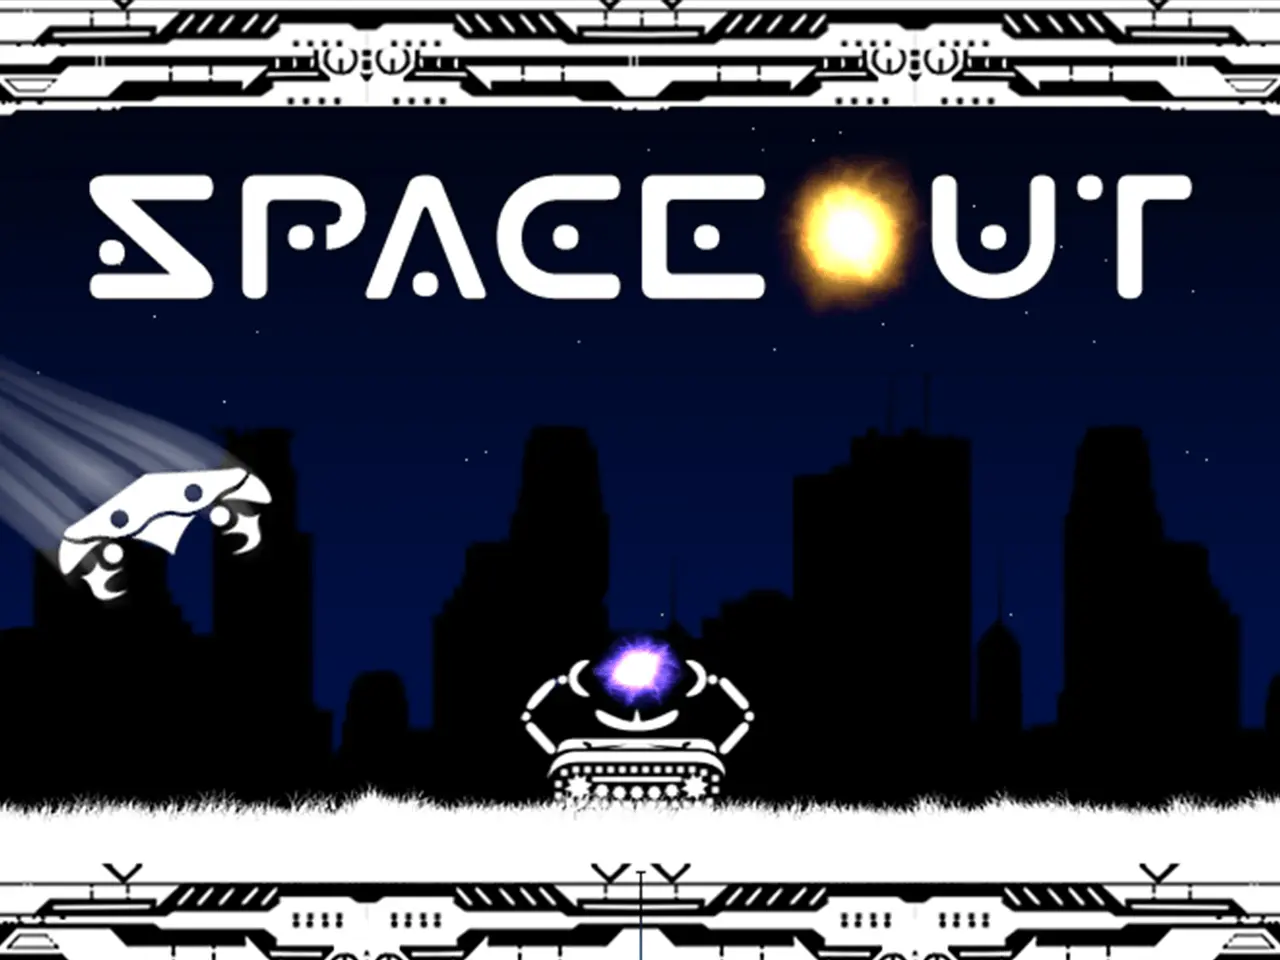 SpaceOut